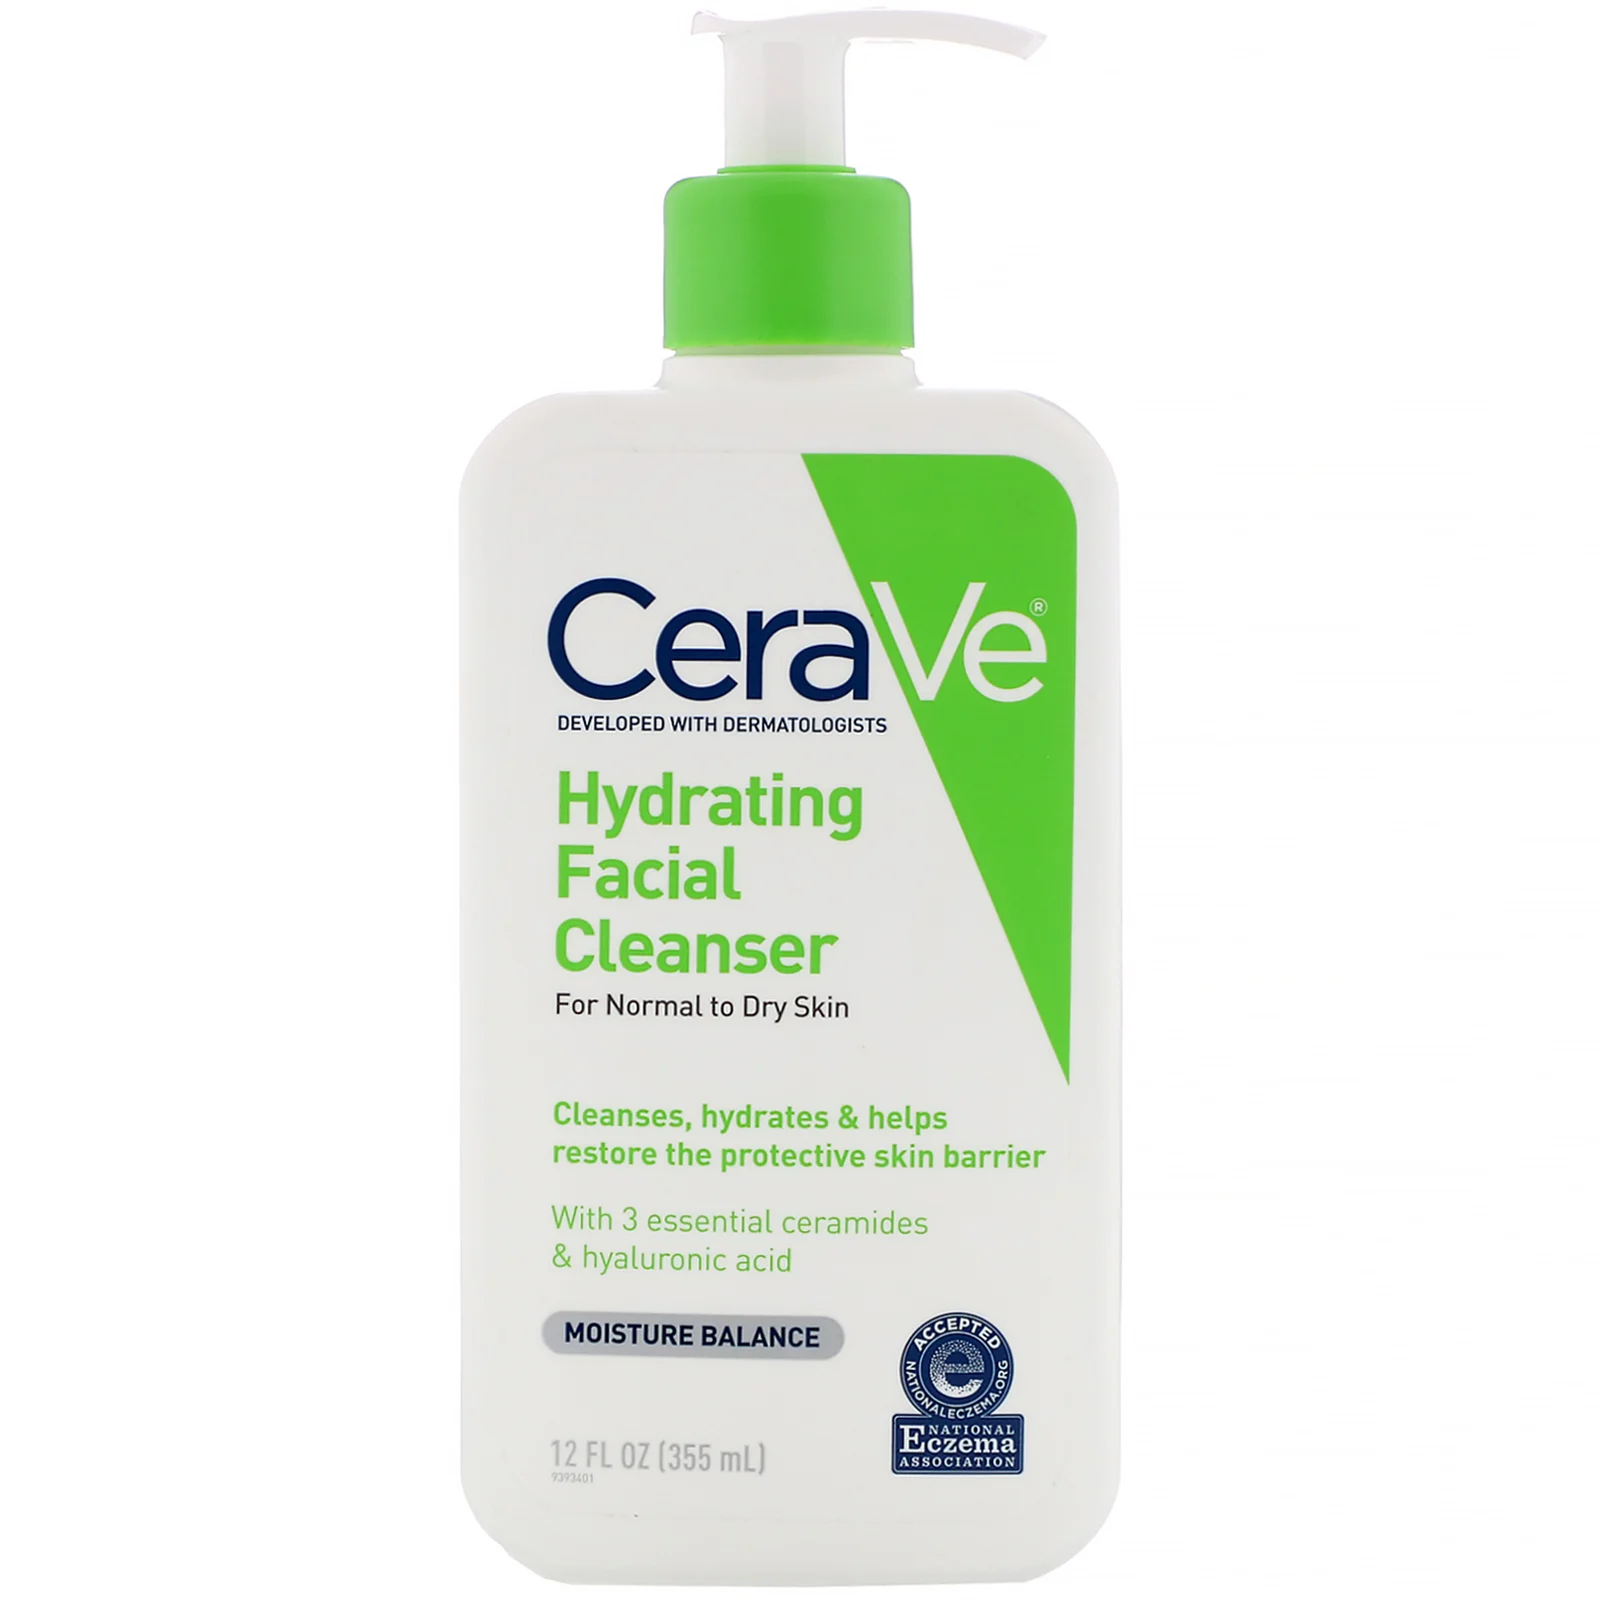 CeraVe Foaming Facial Cleanser or CeraVe Hydrating Cleanser?